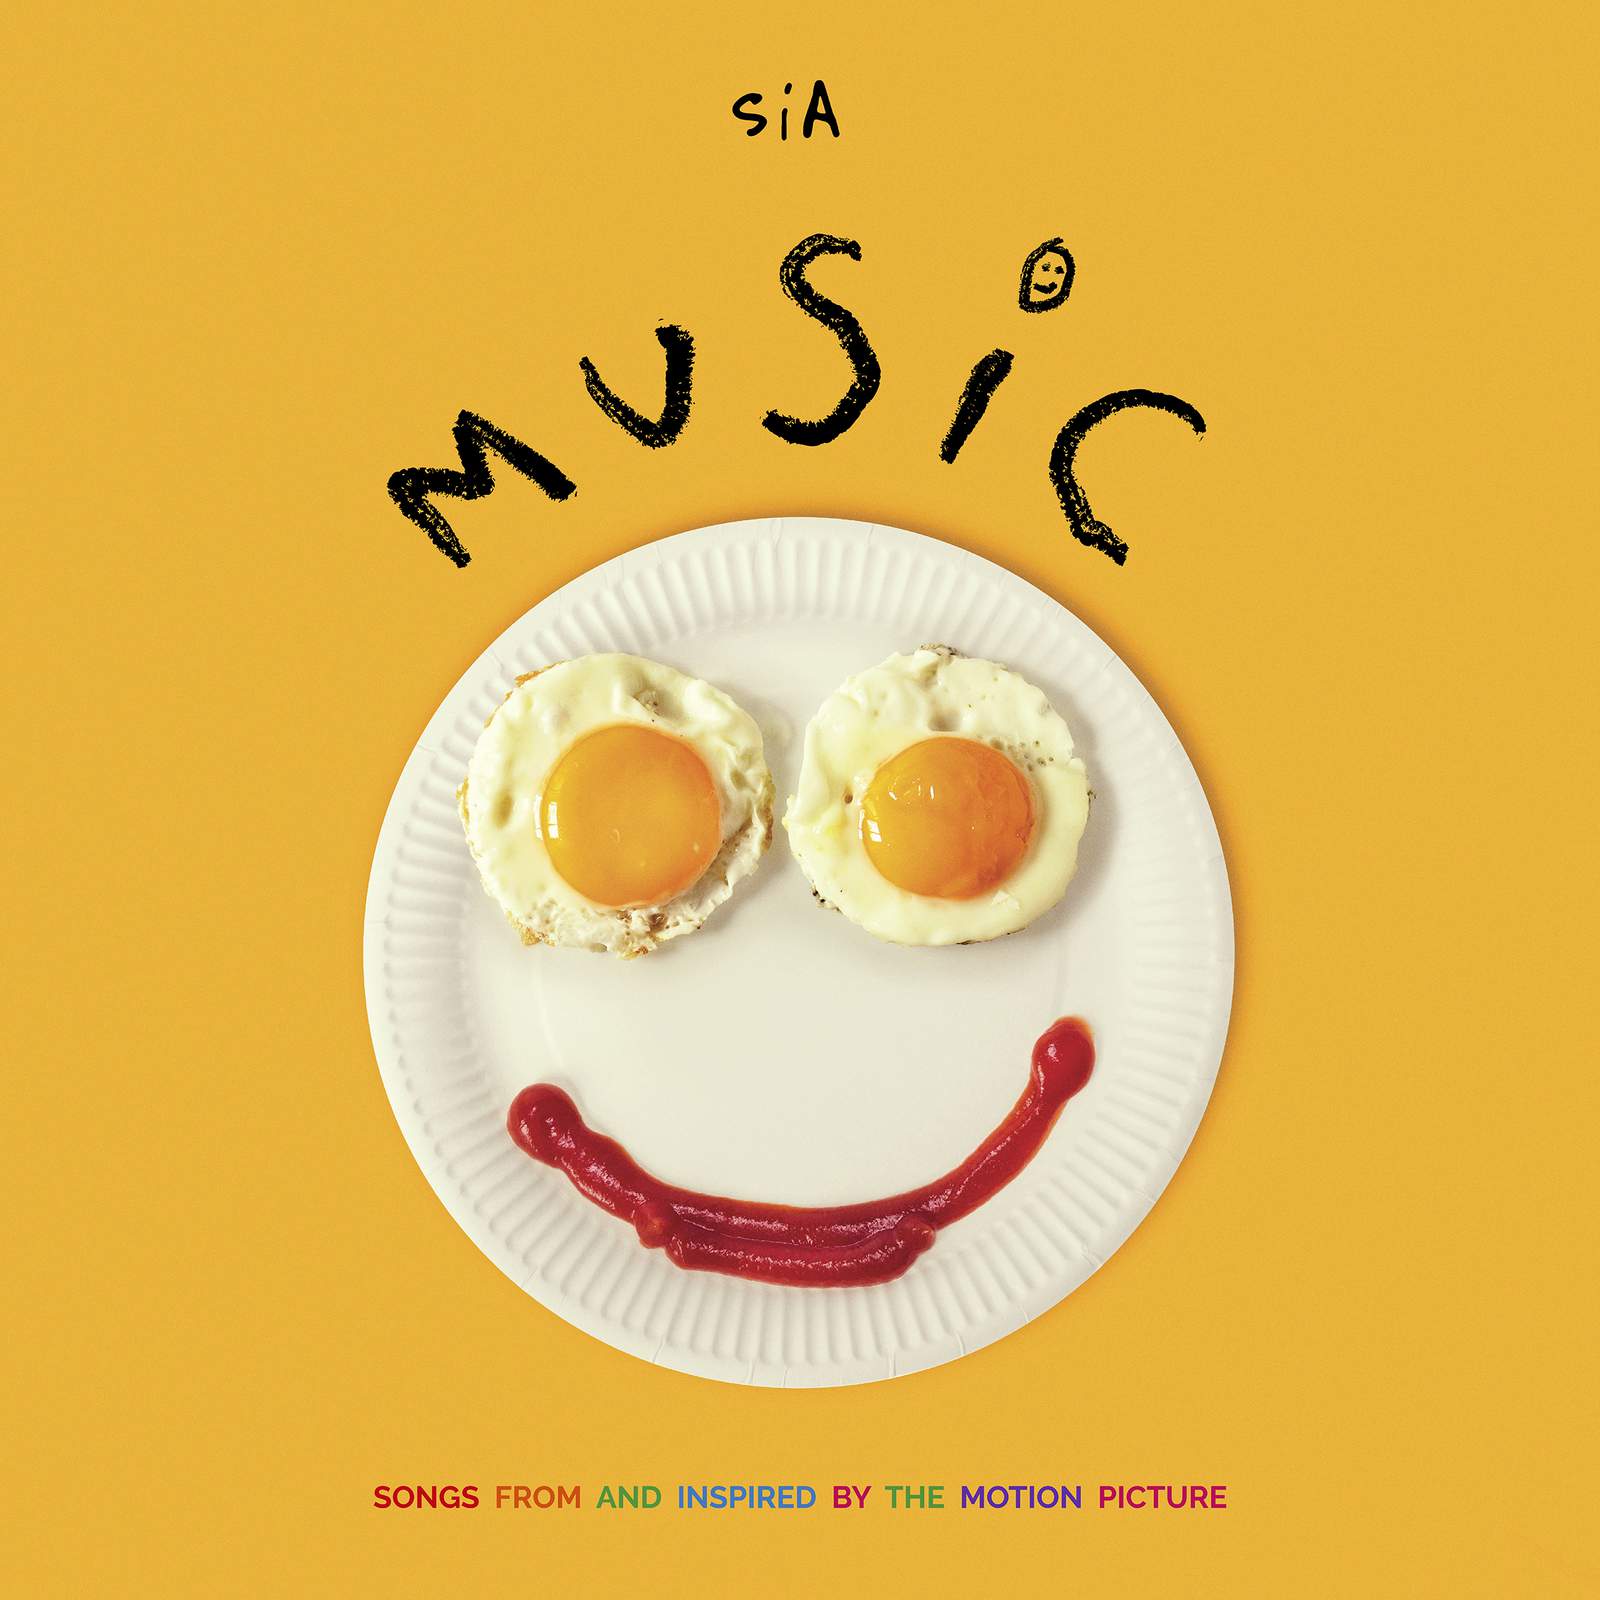 New this week: Sia, Clarice Starling and Kristen Wiig